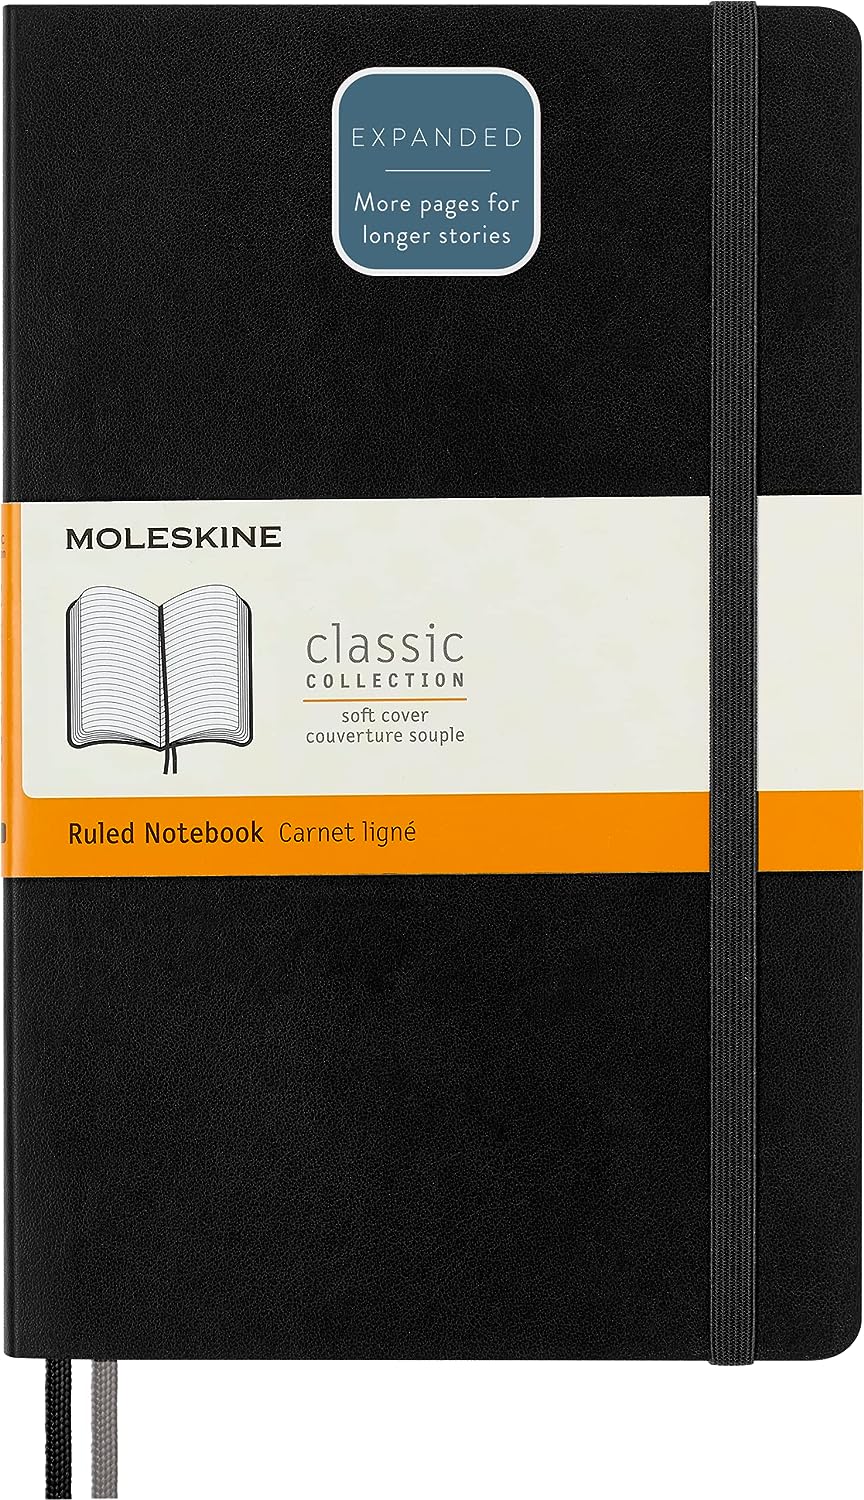 Moleskine Classic Expanded Notebook, Soft Cover, Large (5